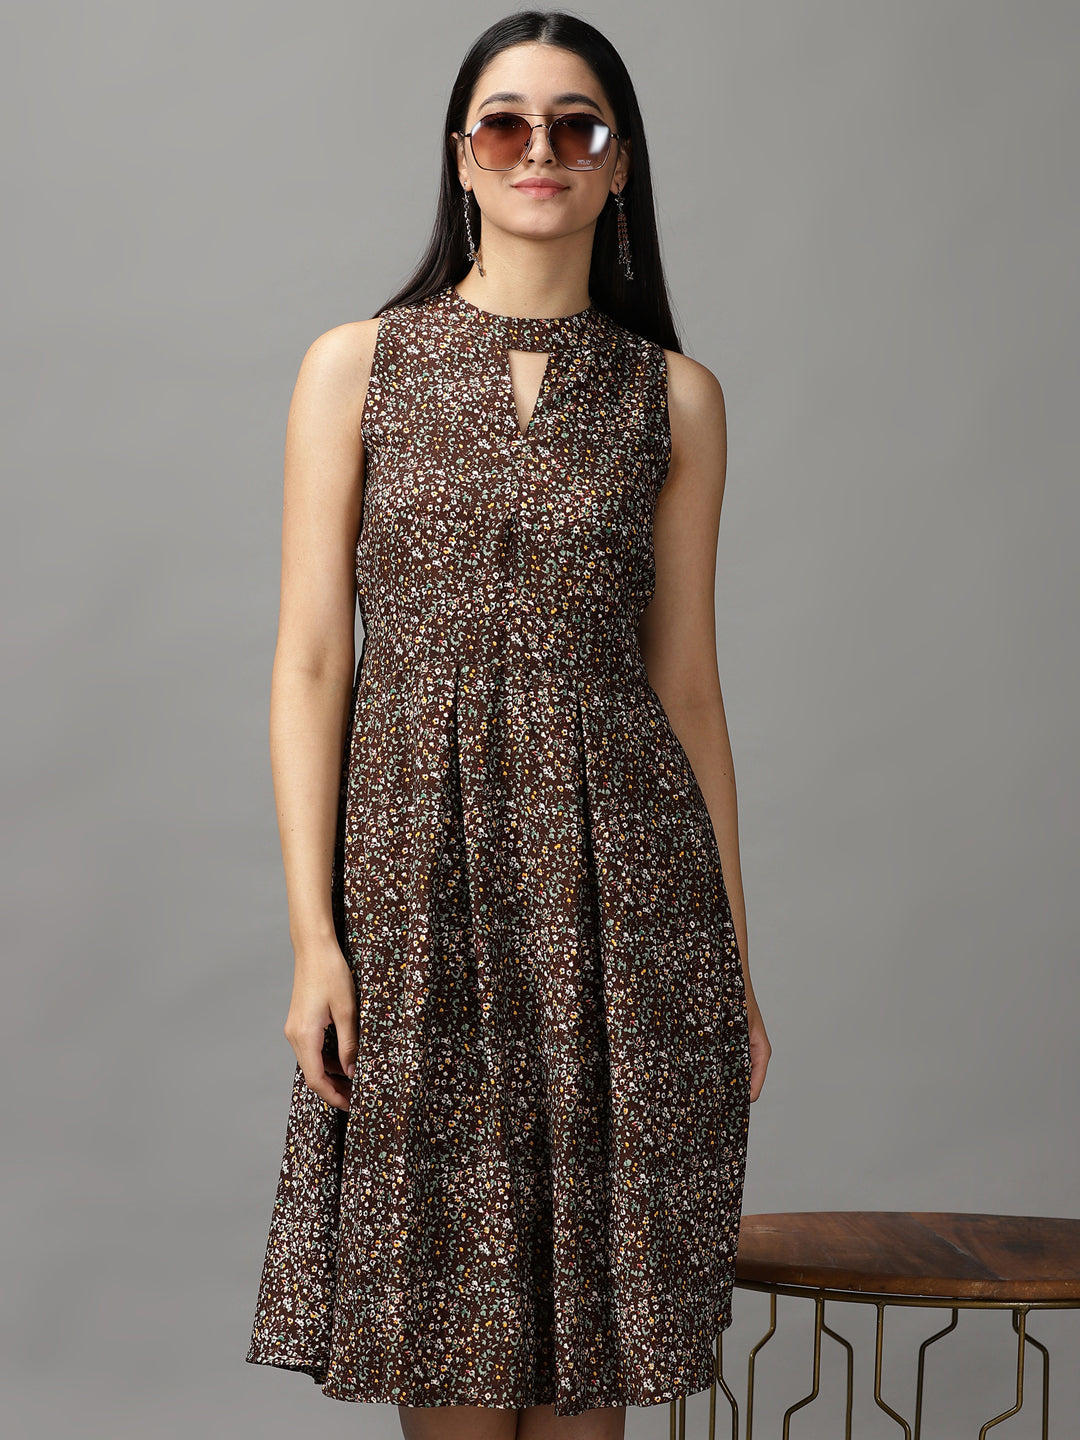 Women's Coffee Brown Floral Fit and Flare Dress